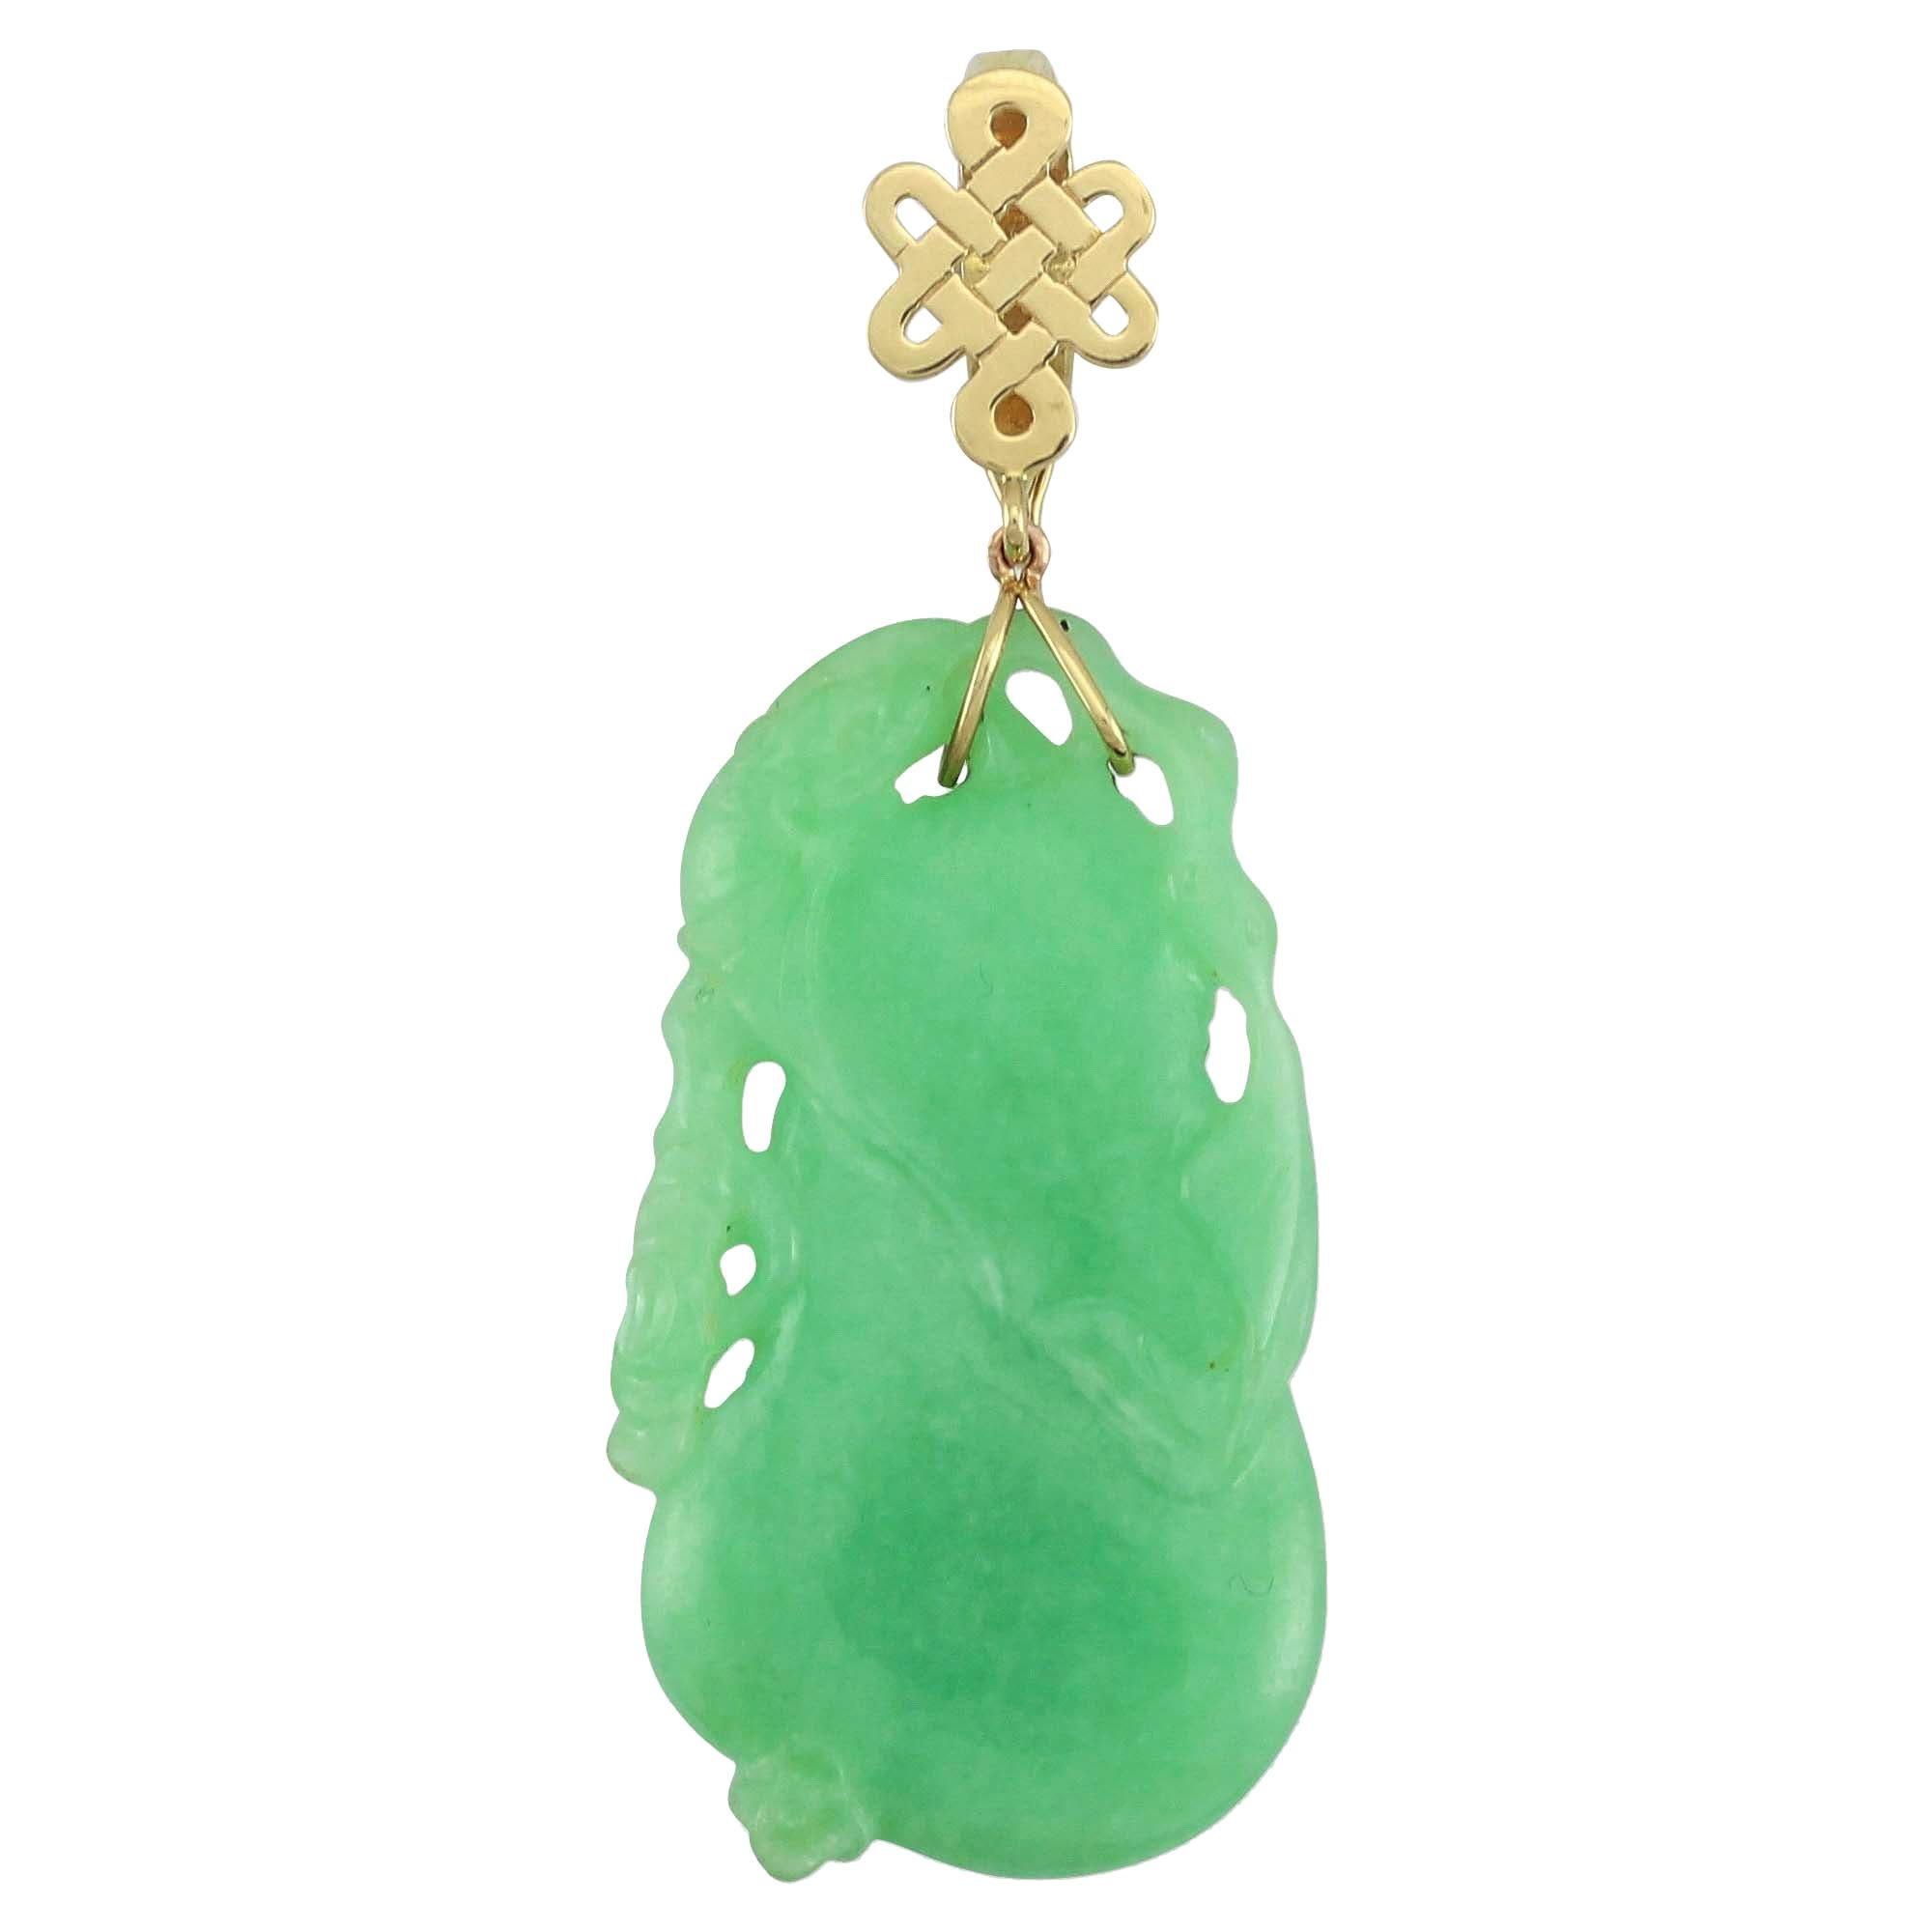 Certified Natural Apple Green Jade Carved Pendant For Sale